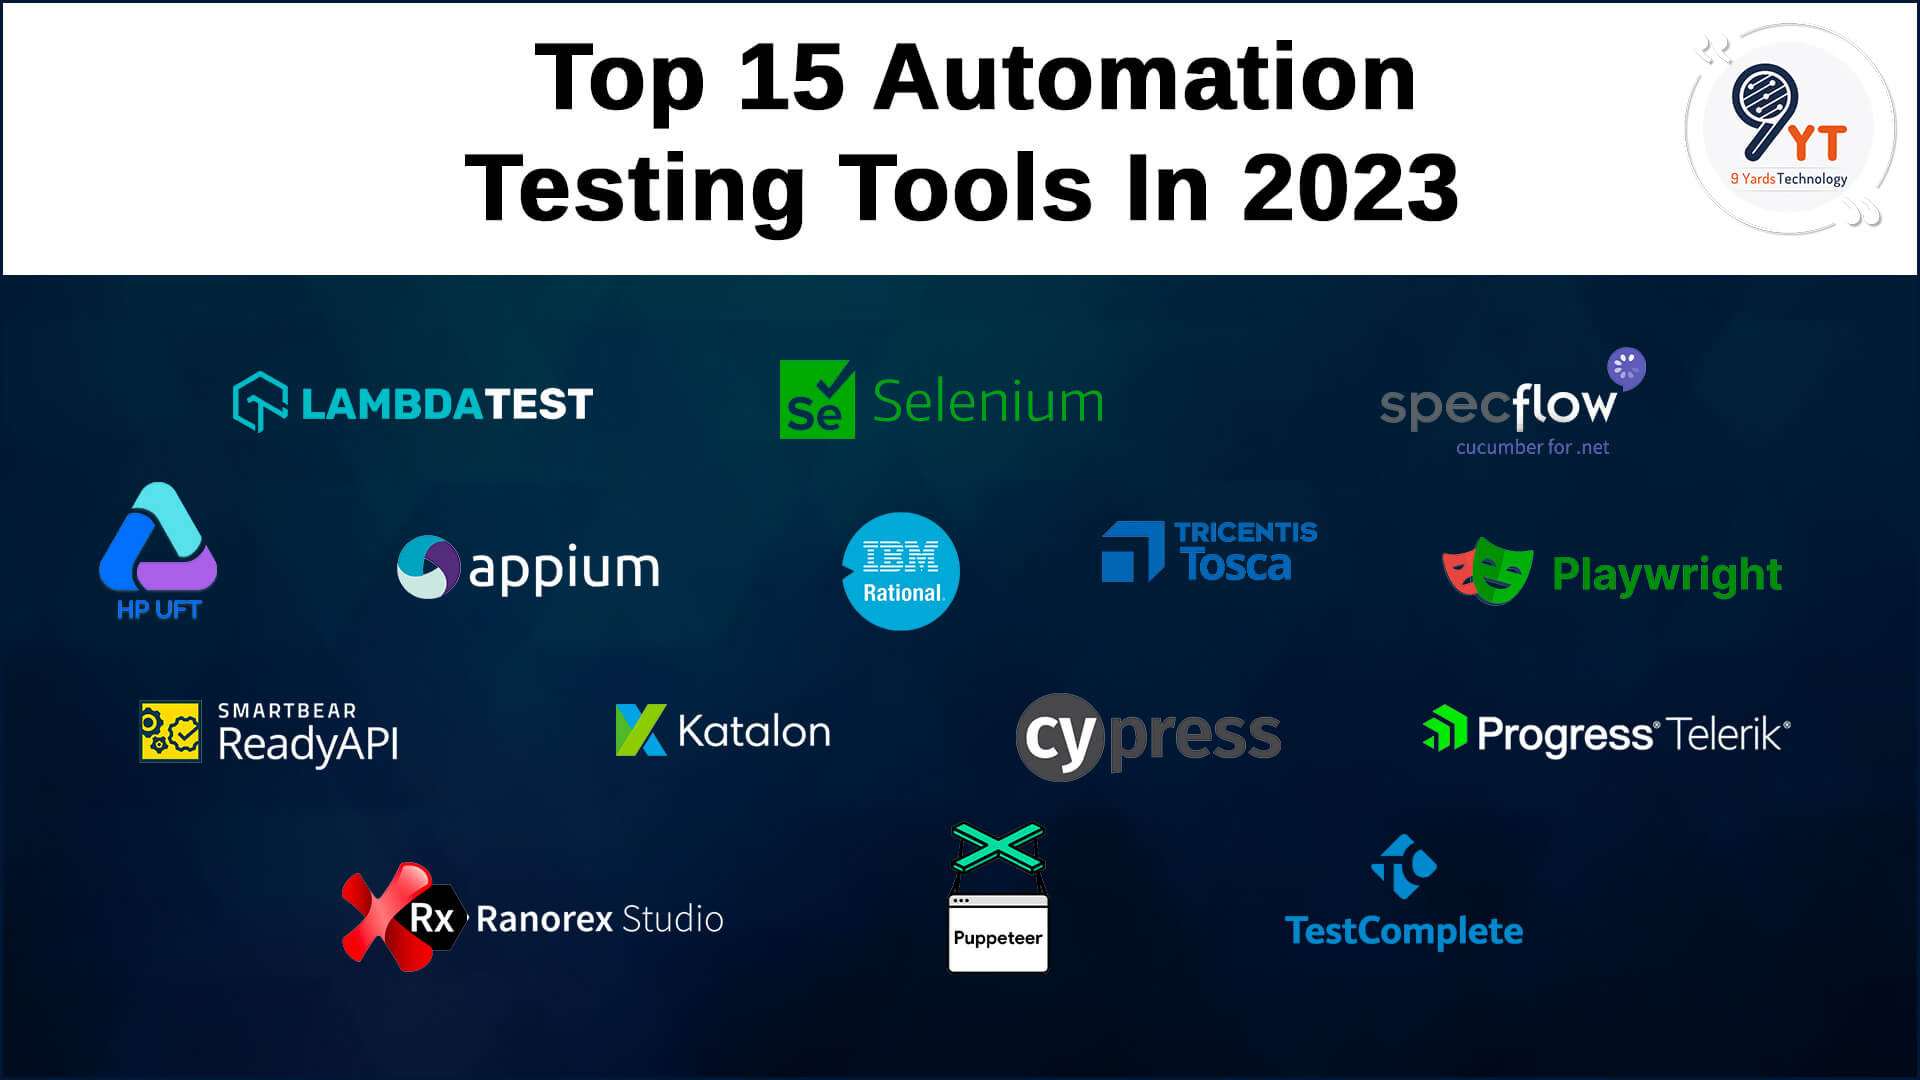 Top 15 Automation Testing Tools